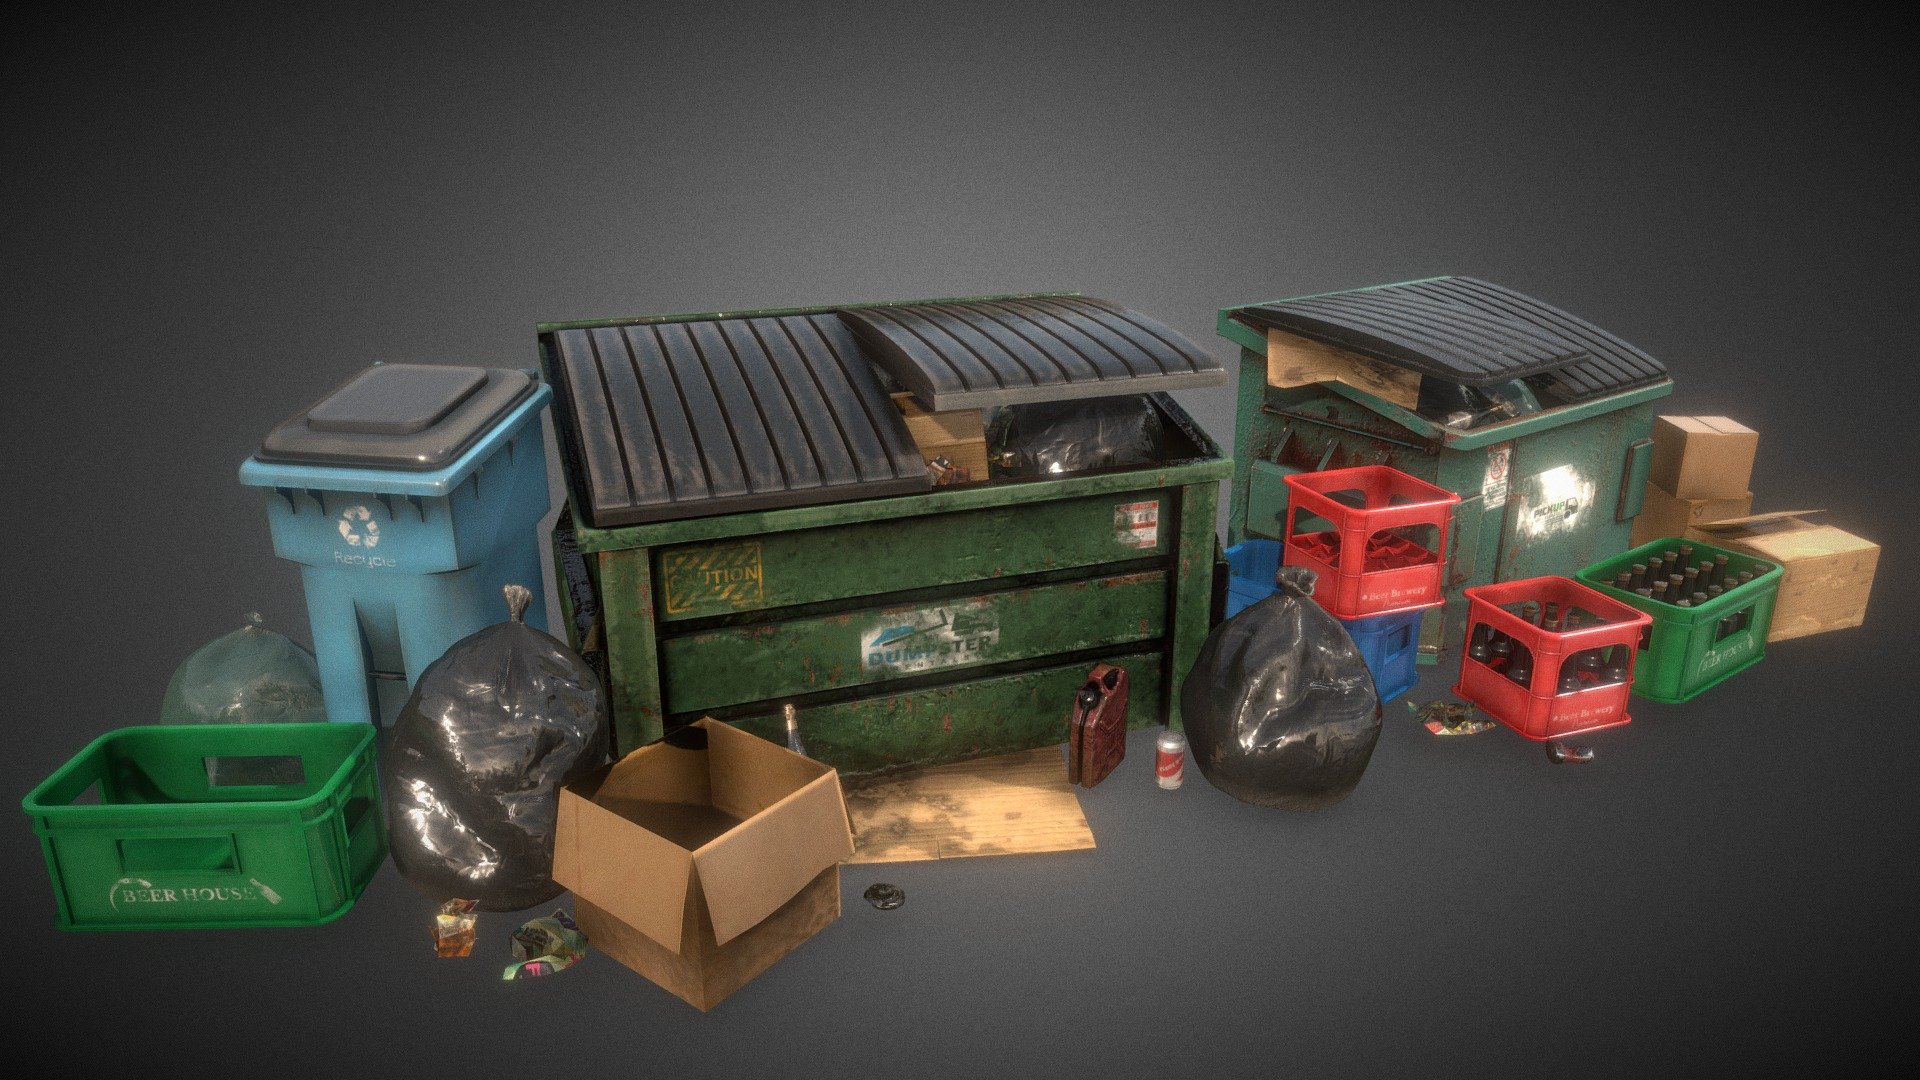 Showcasing Trash assets made in Blender for a commissioned project!

1 Material
4x 4k Textures
Albedo, Normal, AO, Metallic - Urban Alley Trash Props Dirty - 3D model by LegendsVR (@legendsvrc) 3d model